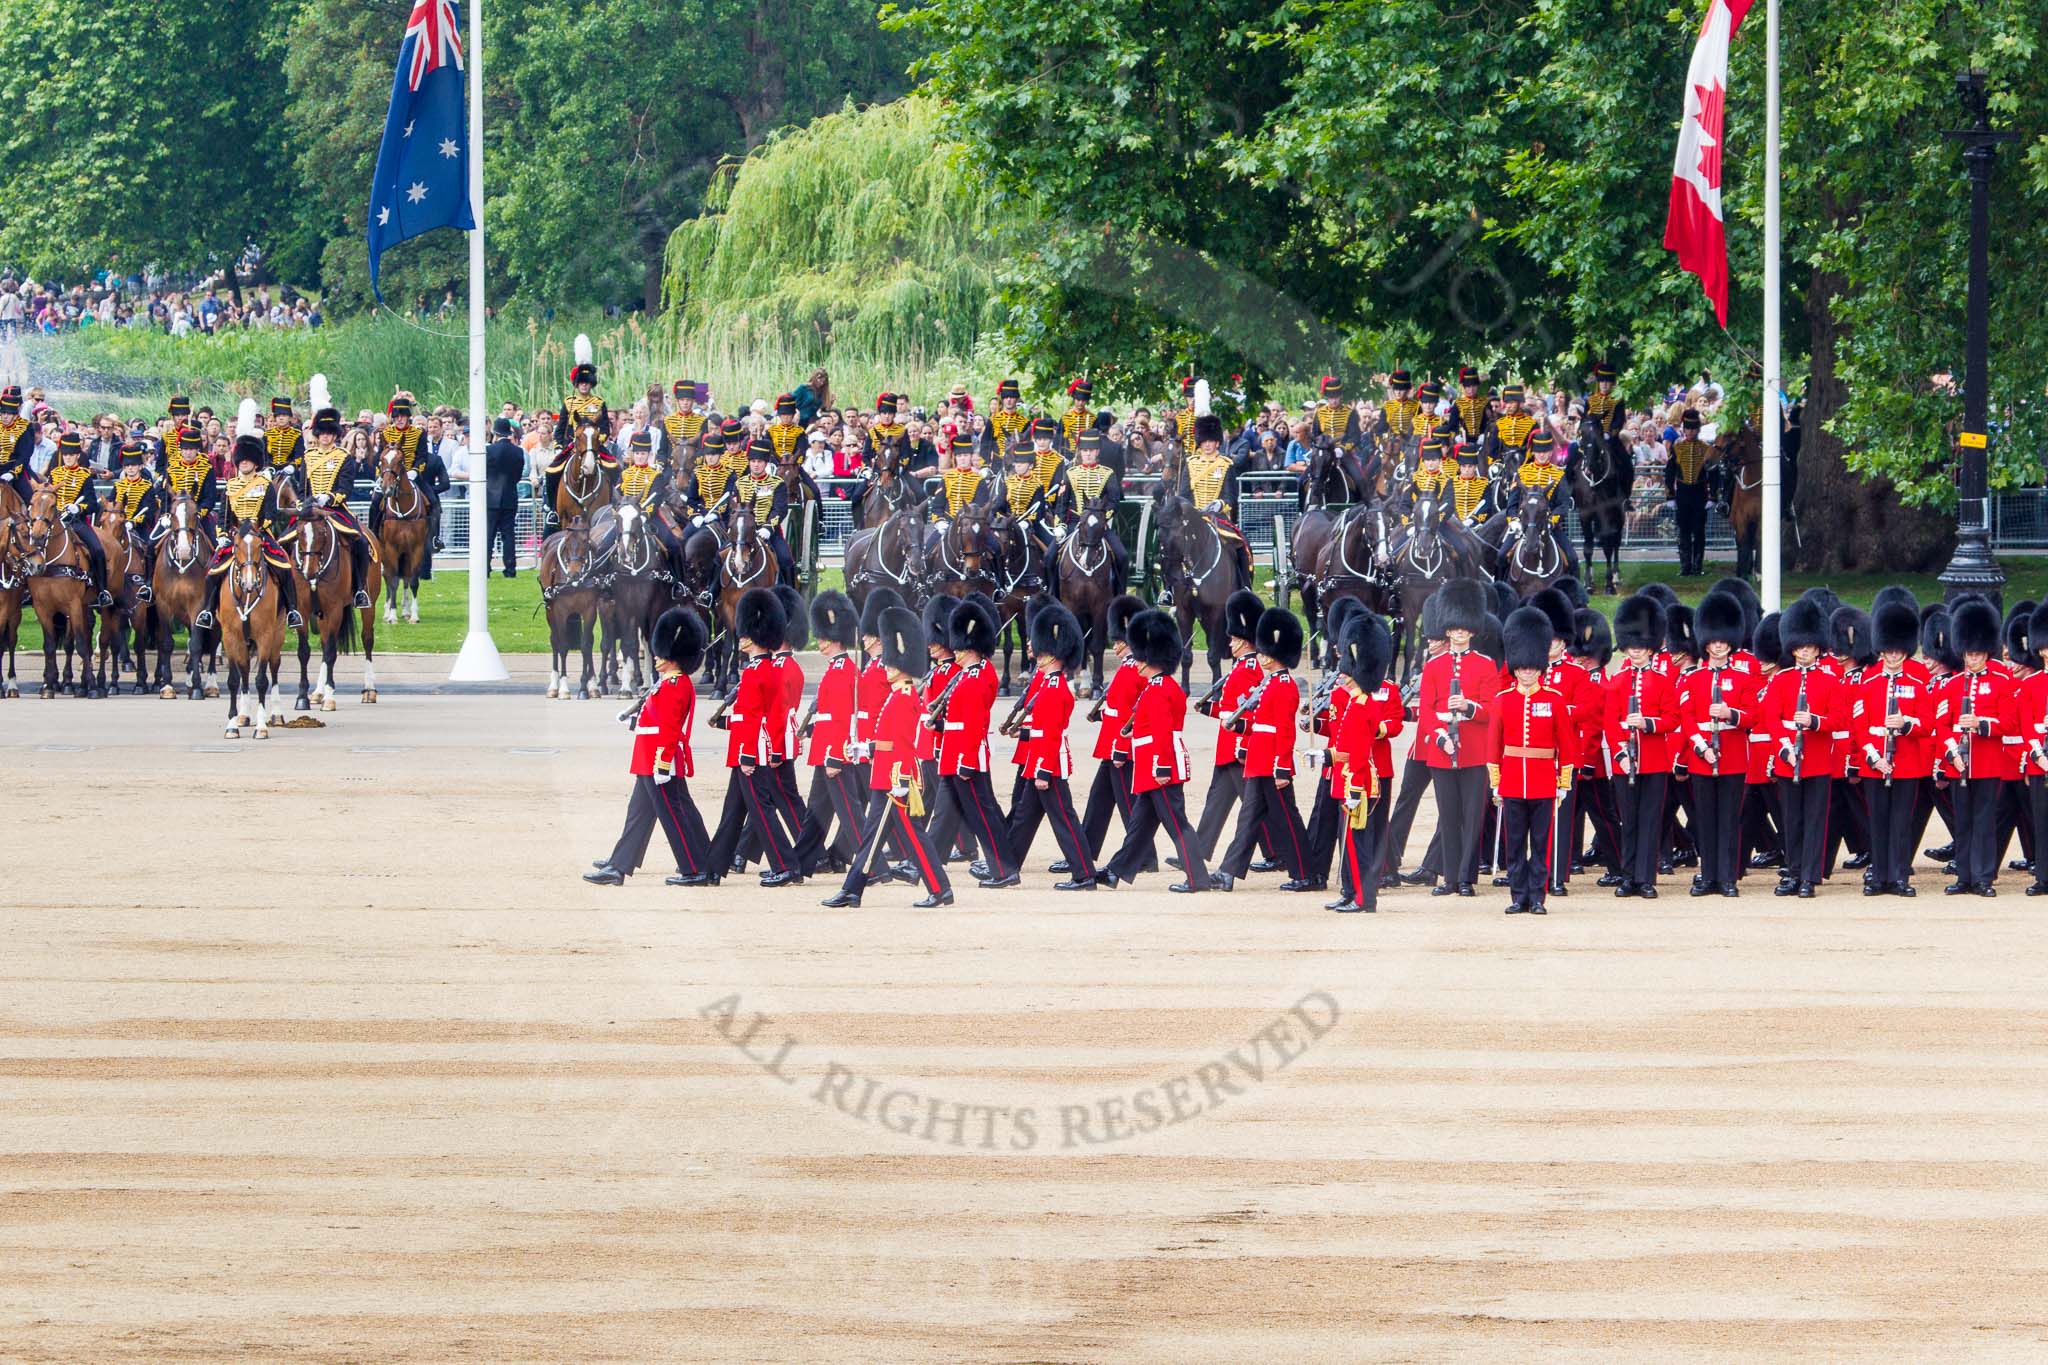 Trooping the Colour 2014.
Horse Guards Parade, Westminster,
London SW1A,

United Kingdom,
on 14 June 2014 at 11:28, image #574